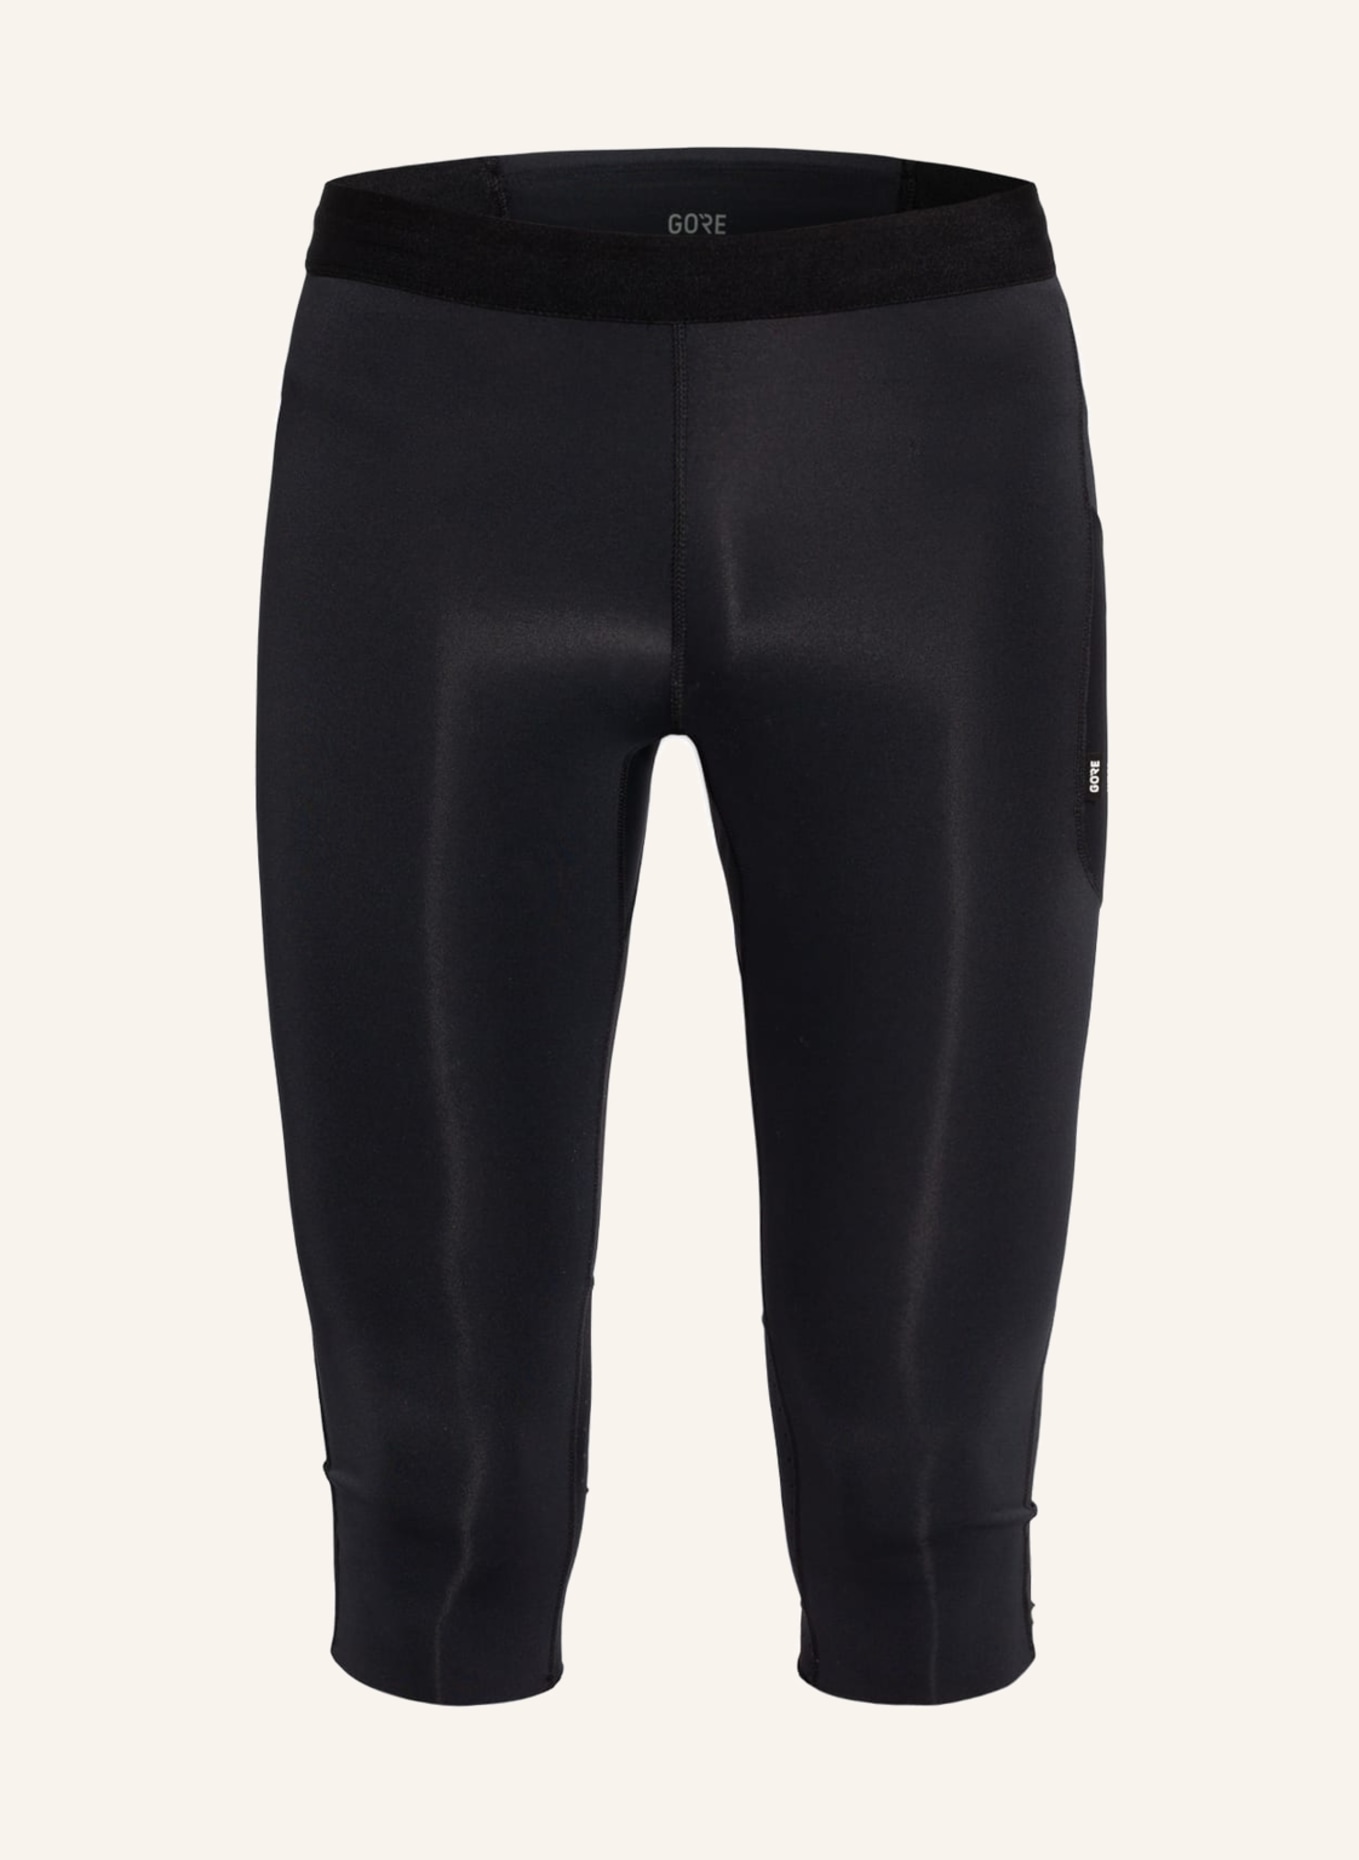 GORE RUNNING WEAR 3/4 tights IMPULSE with mesh inserts, Color: BLACK (Image 1)